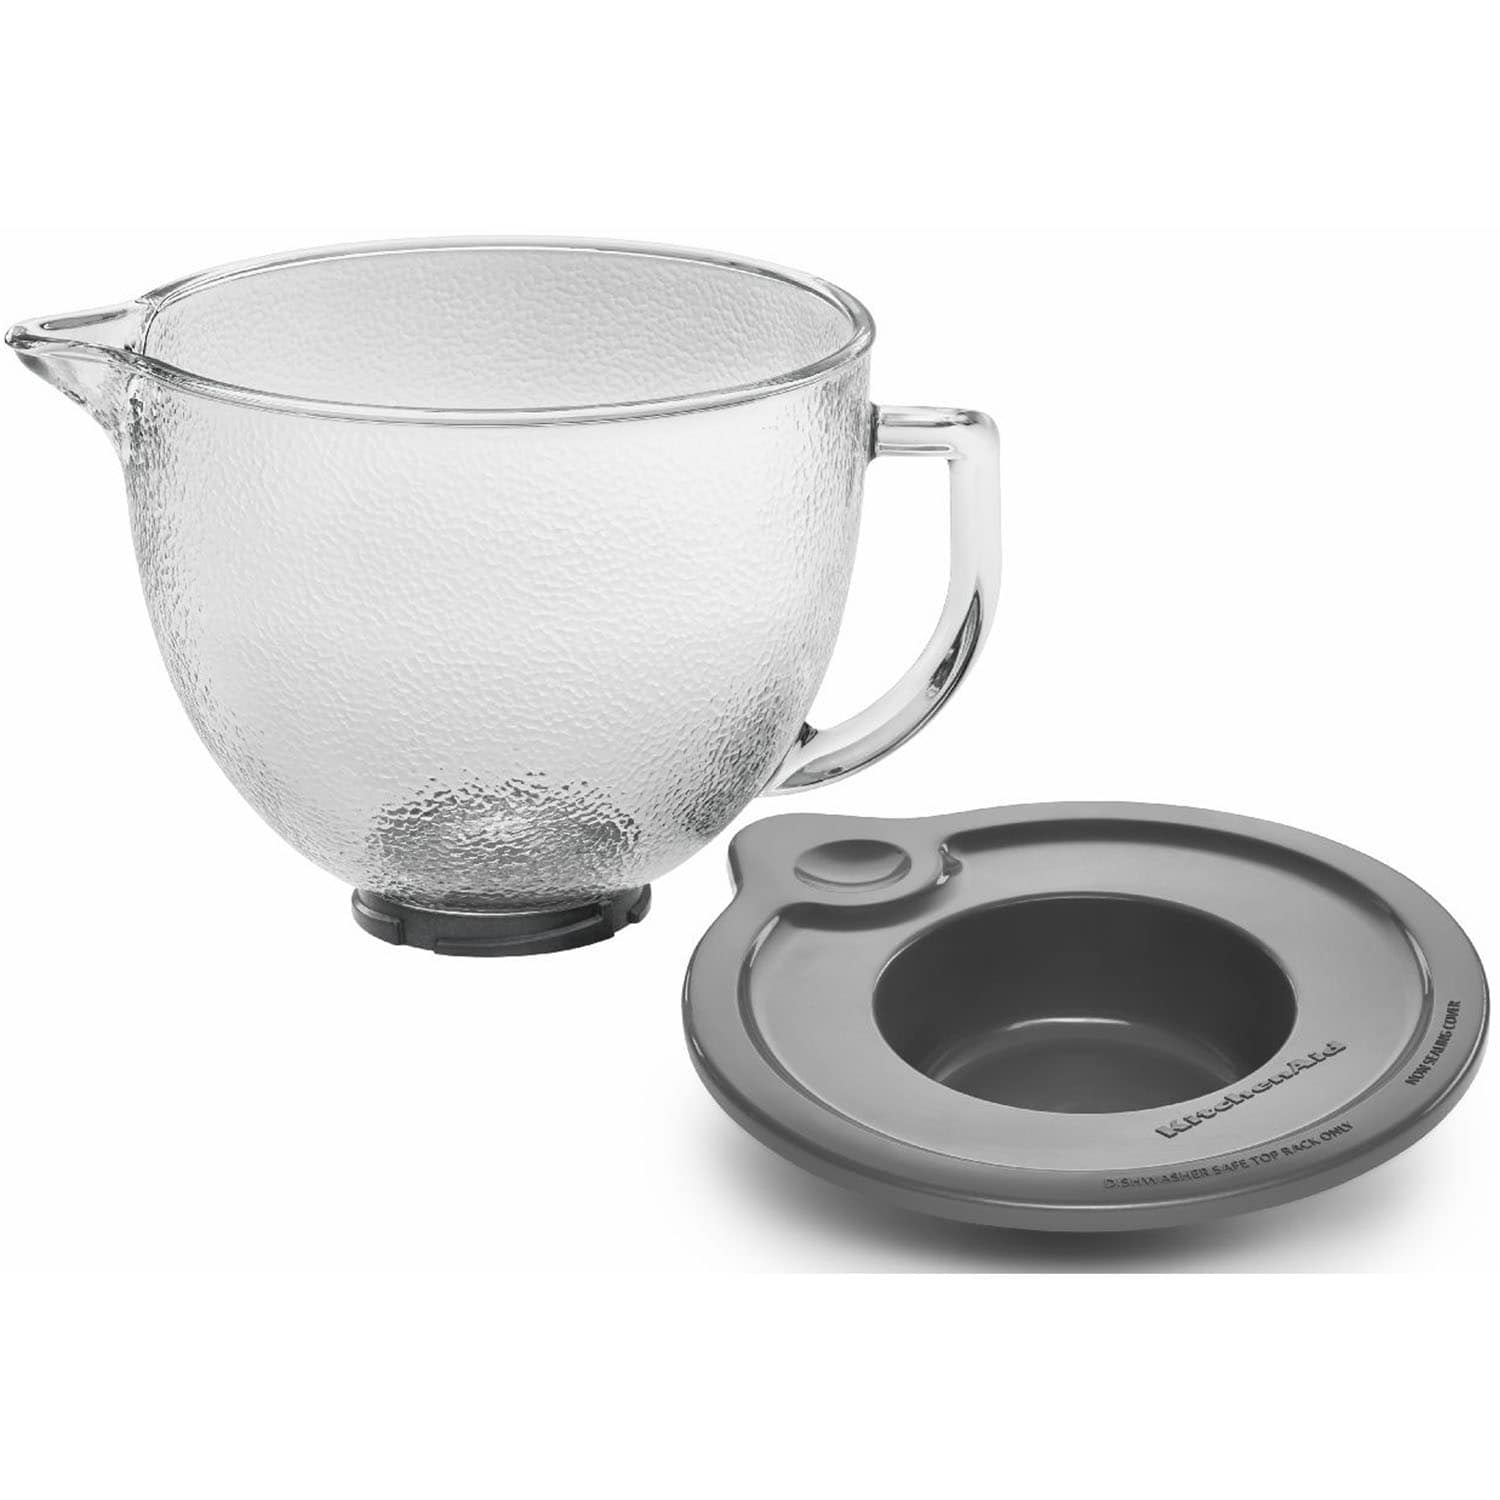 KitchenAid Stainless Bowl W/Comfort Handle KSM150 Replacement Bowl Only